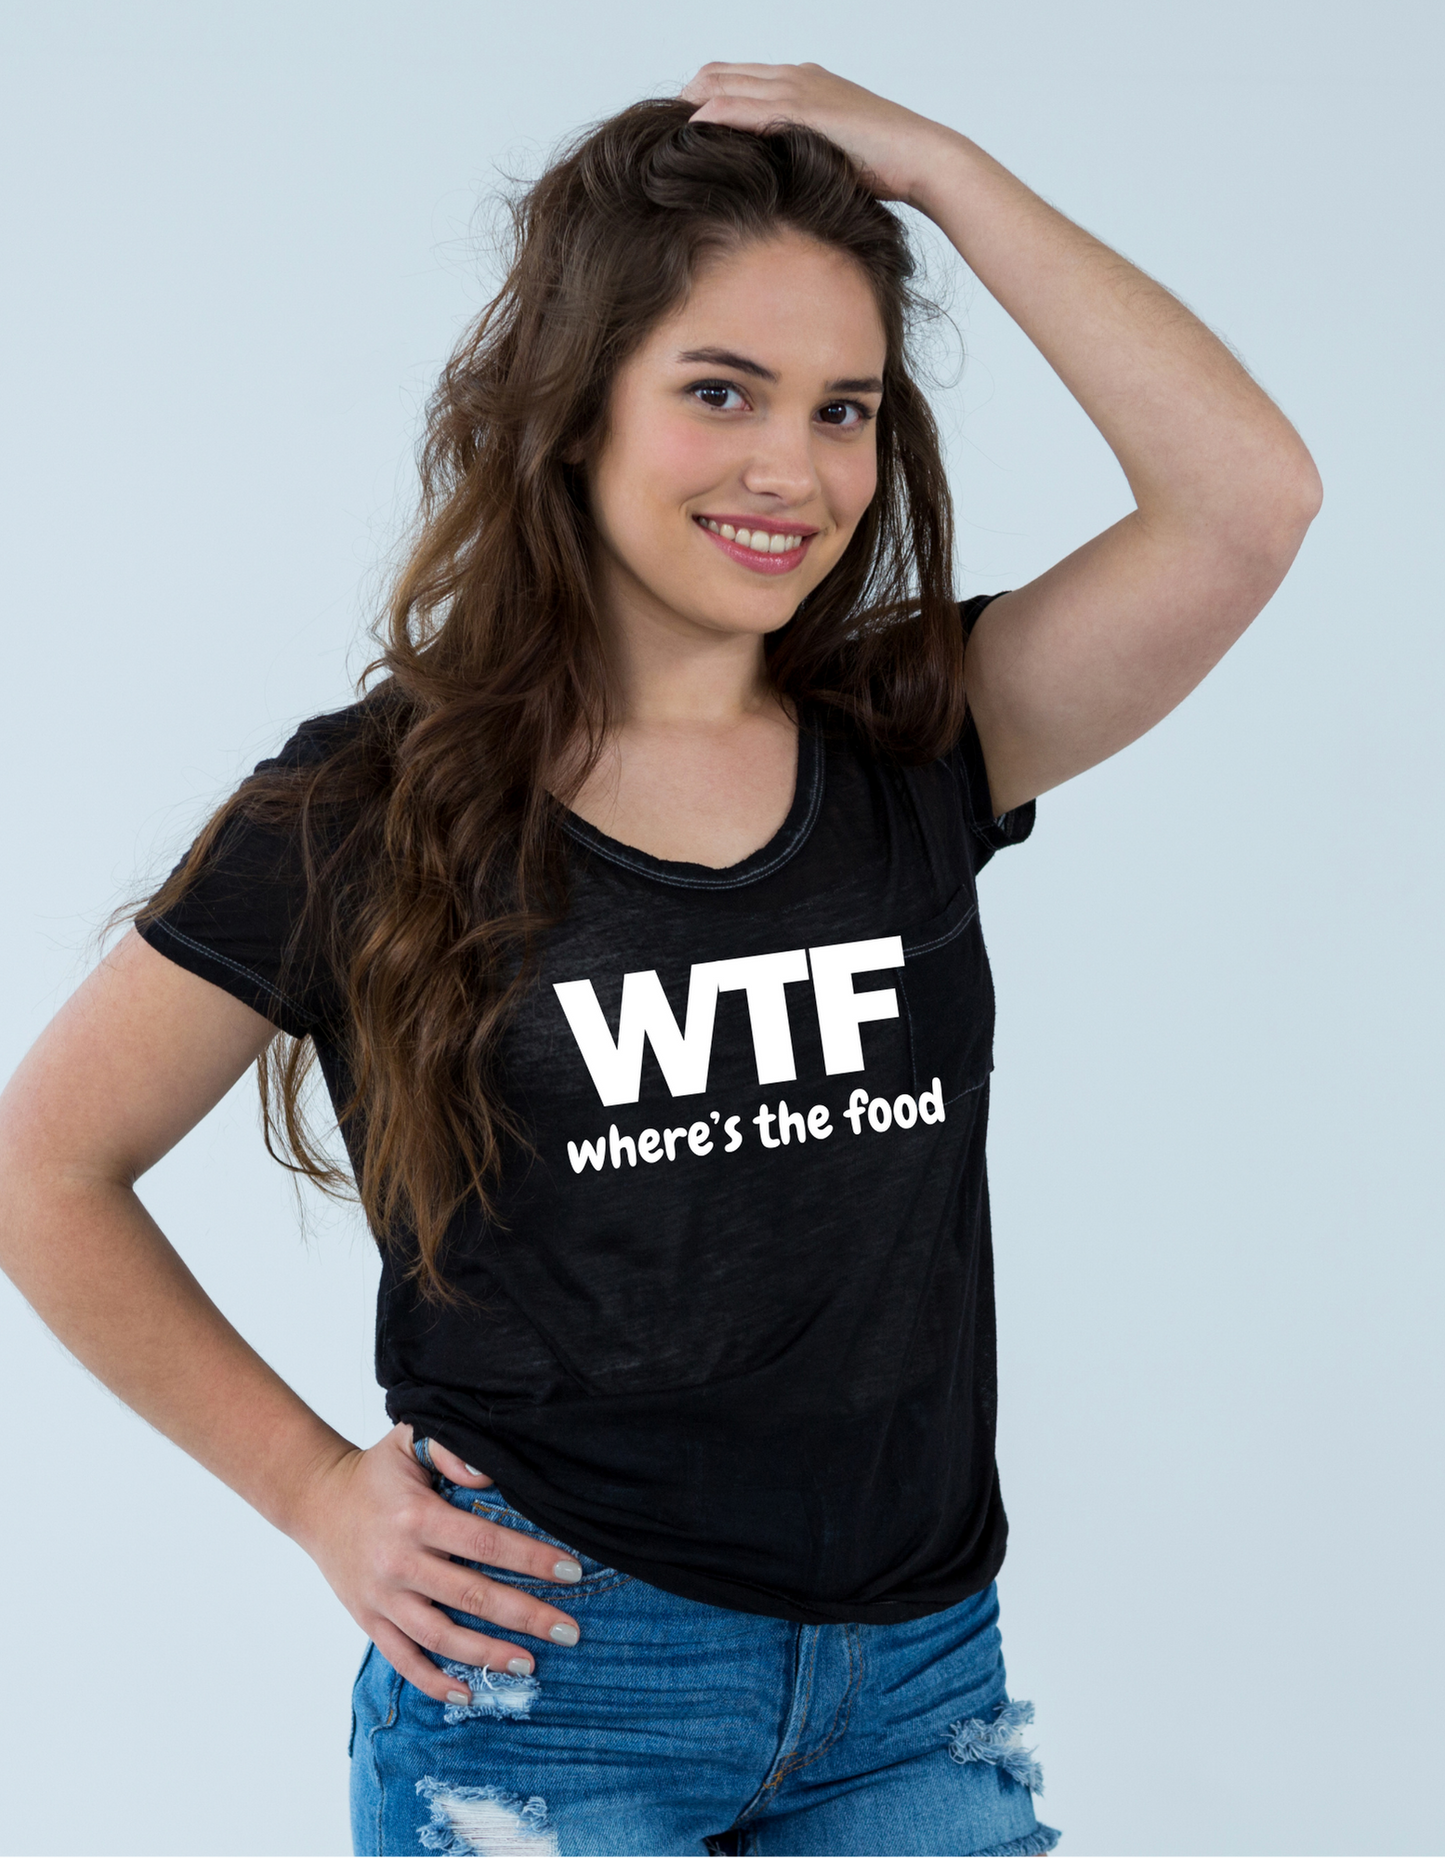 🤬 Its not what you think T-shirt.